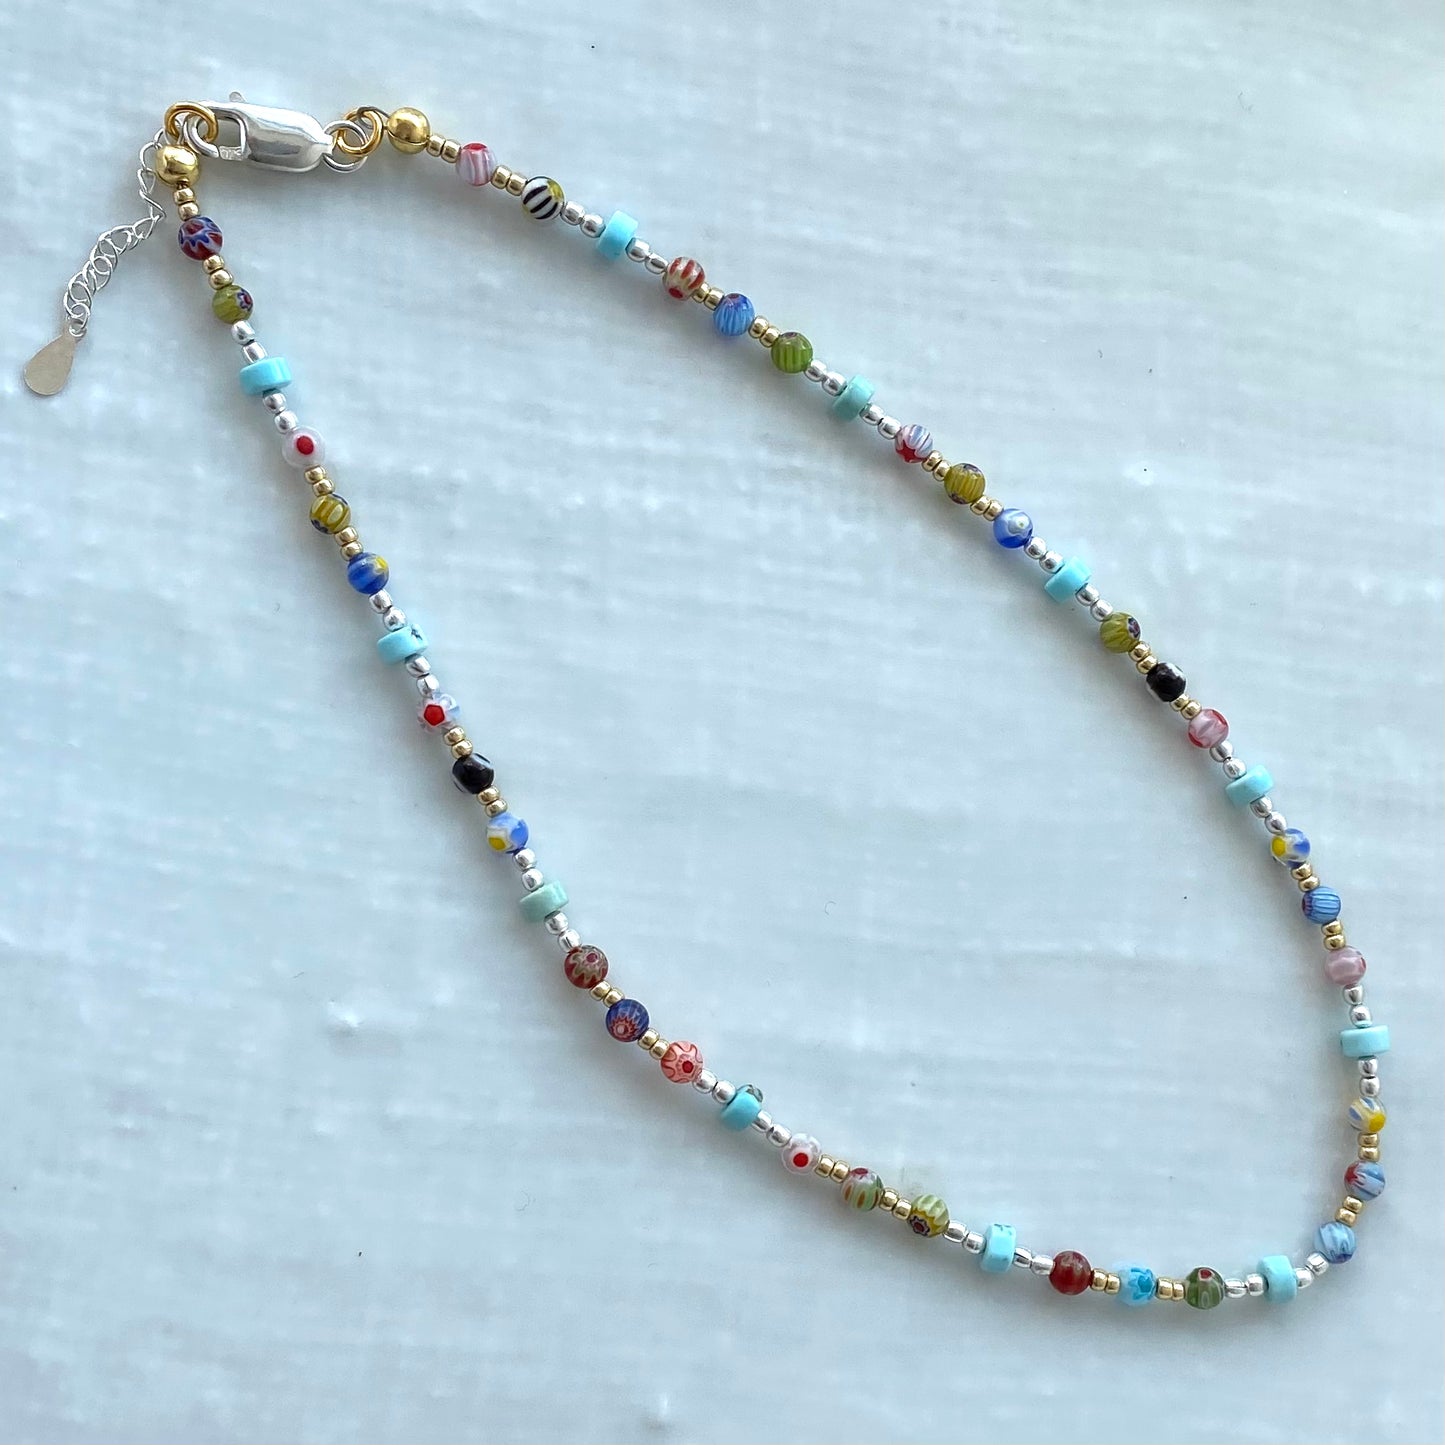 The Sun Soaked Boho necklace